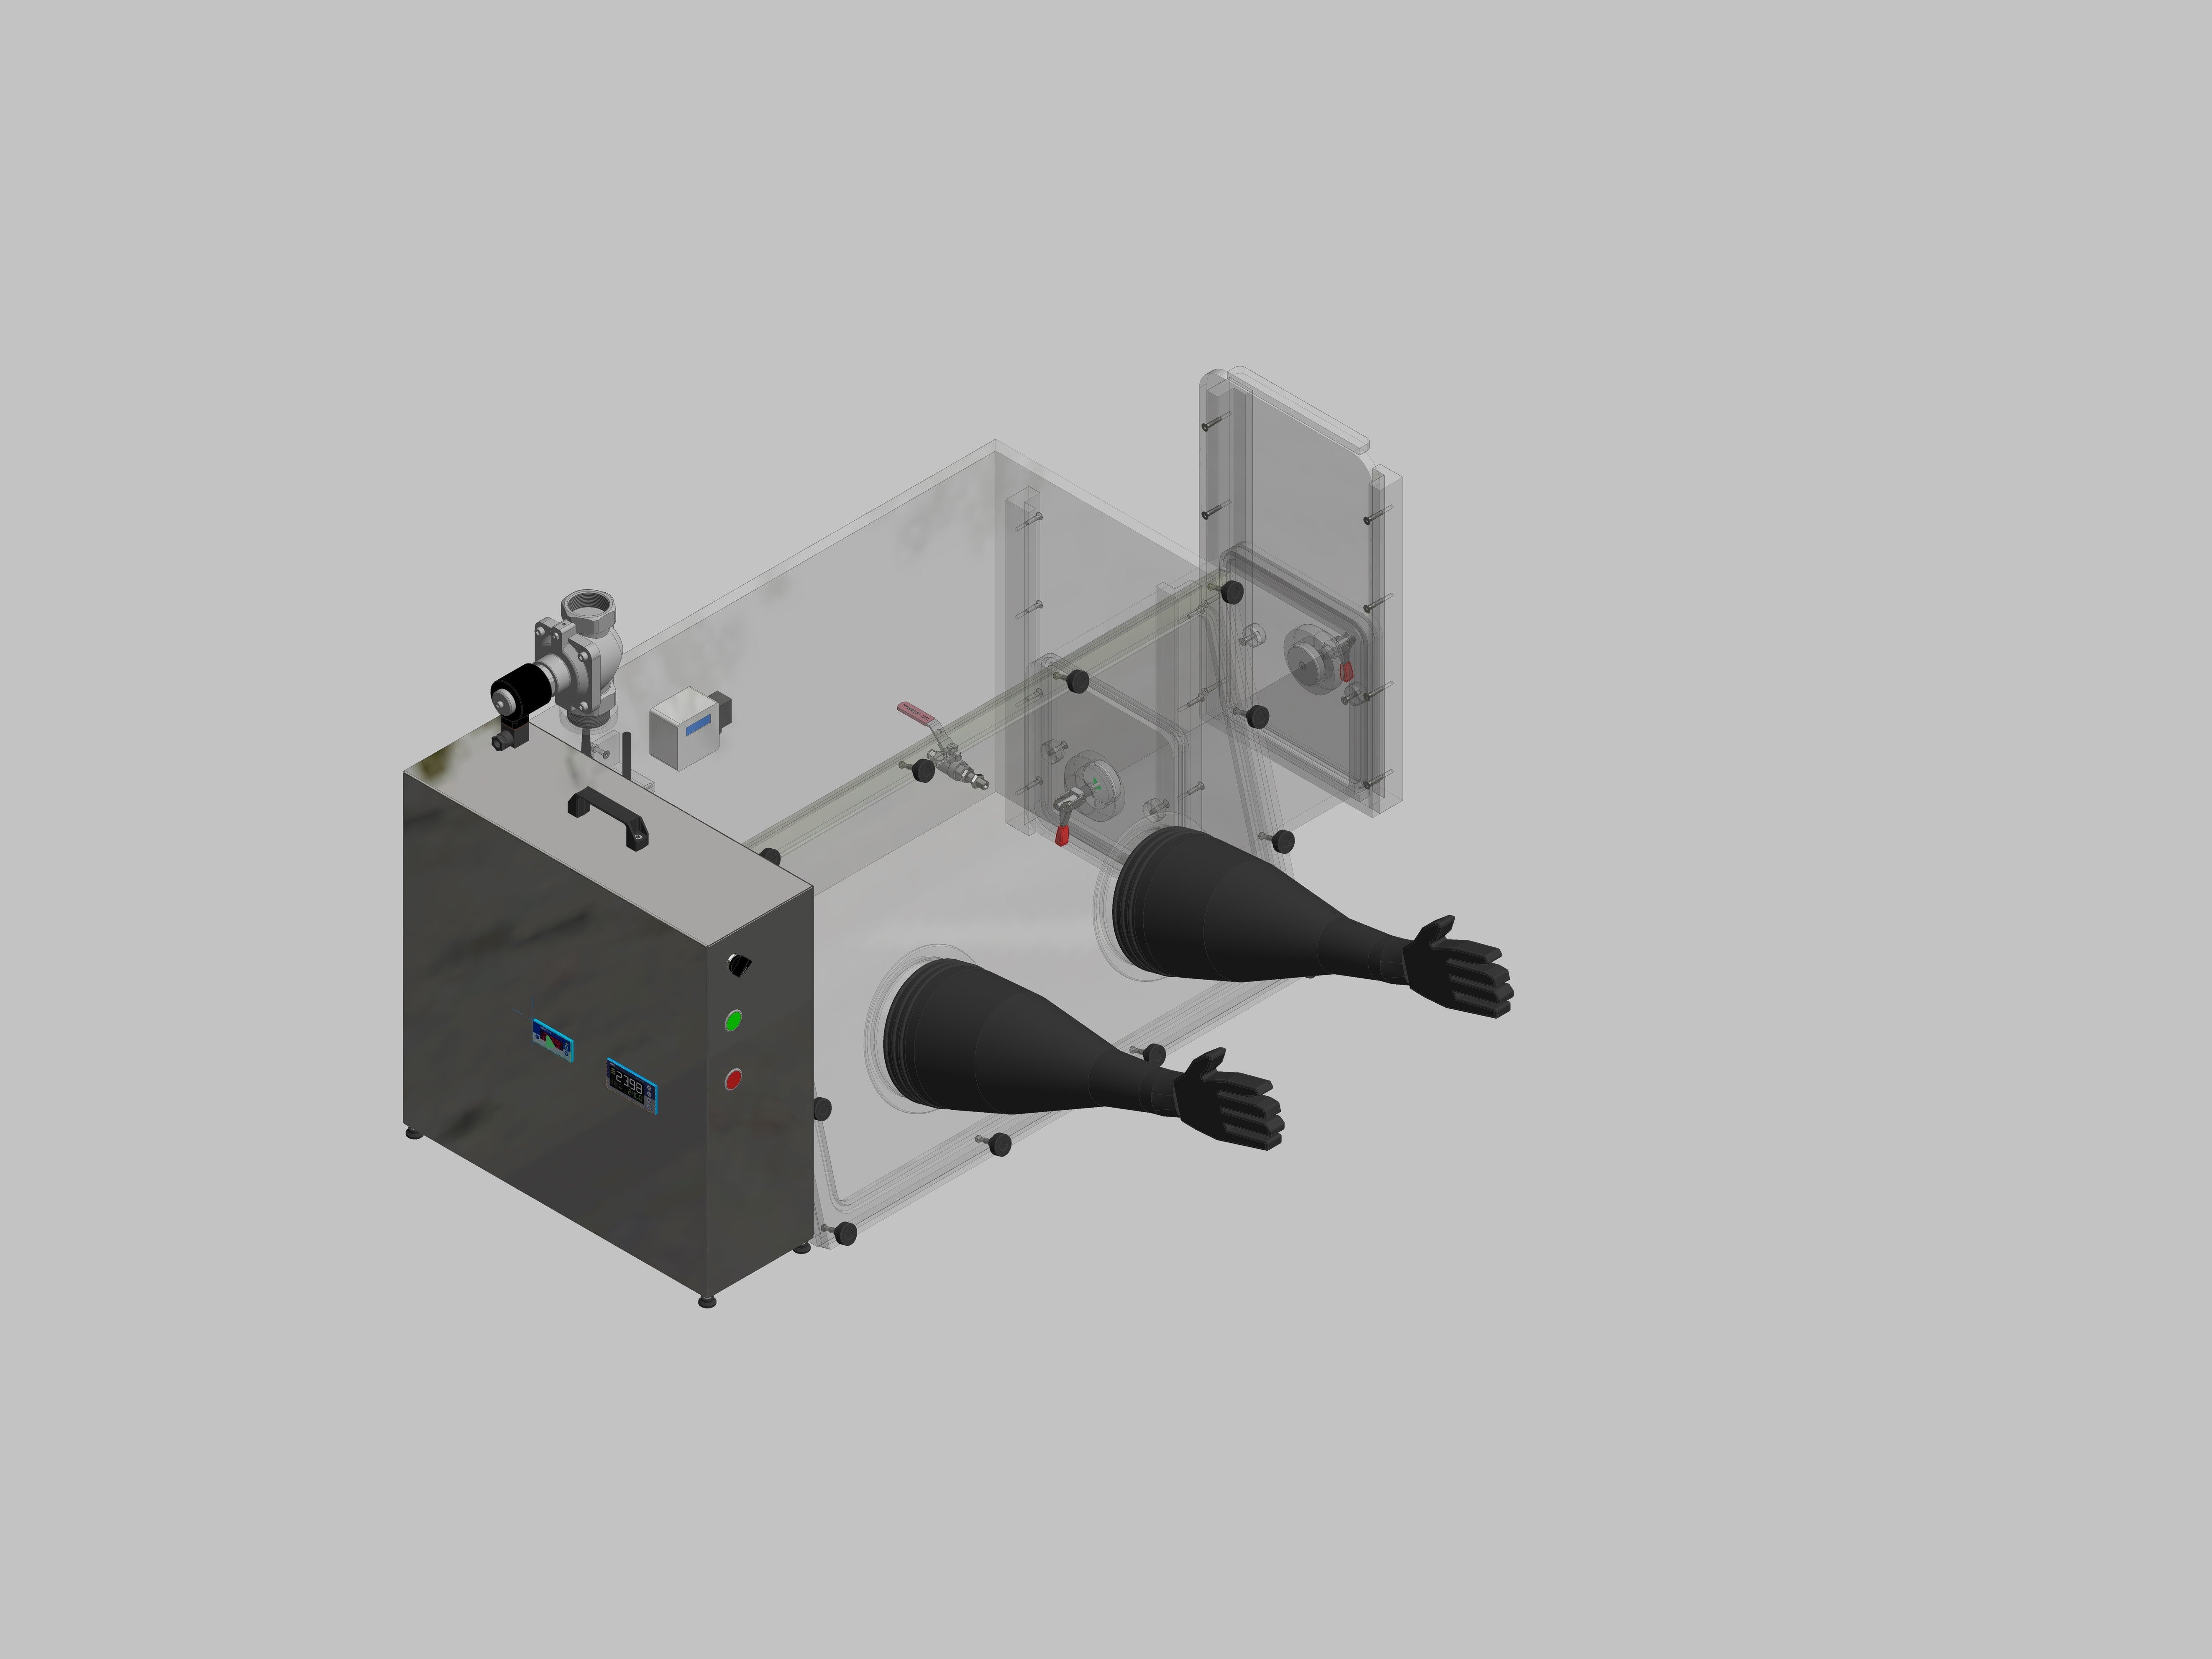 Glovebox made of acrylic&gt; Gas filling: automatic flushing with pressure control, front design: removable, side design: rectangular lock control: oxygen regulator with humidity display